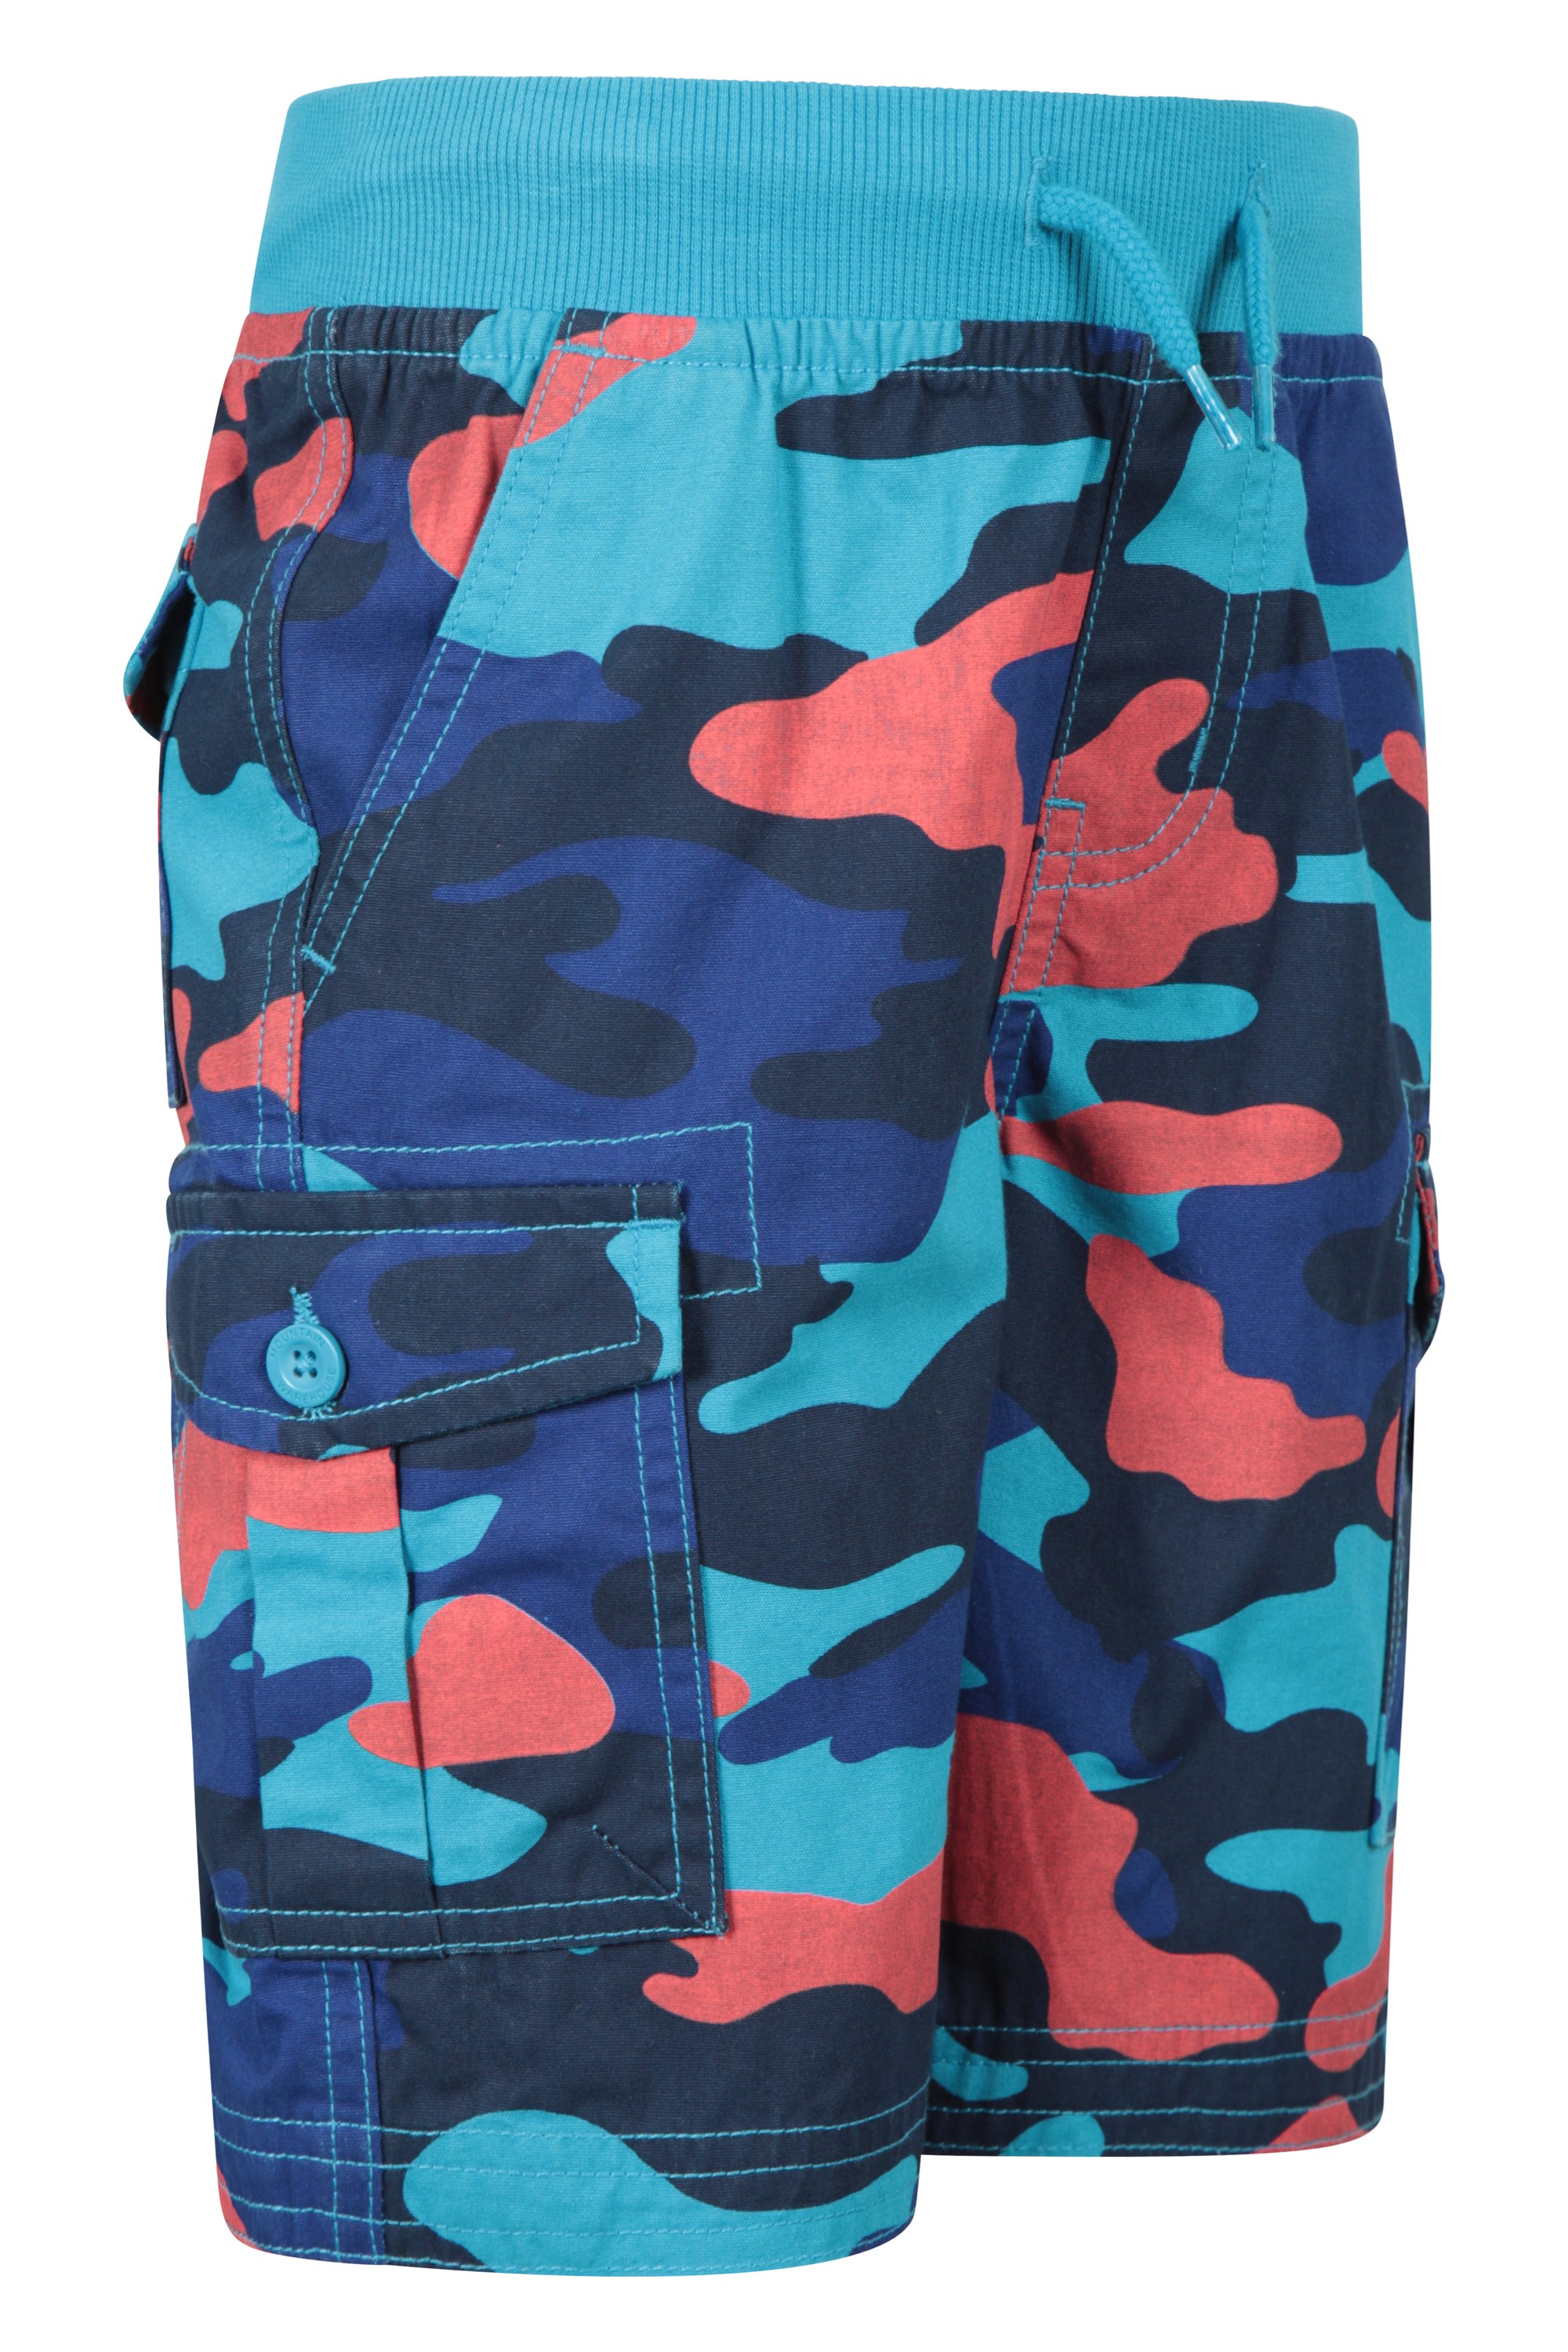 Keep Moving Lined Shorts - Blue Camo